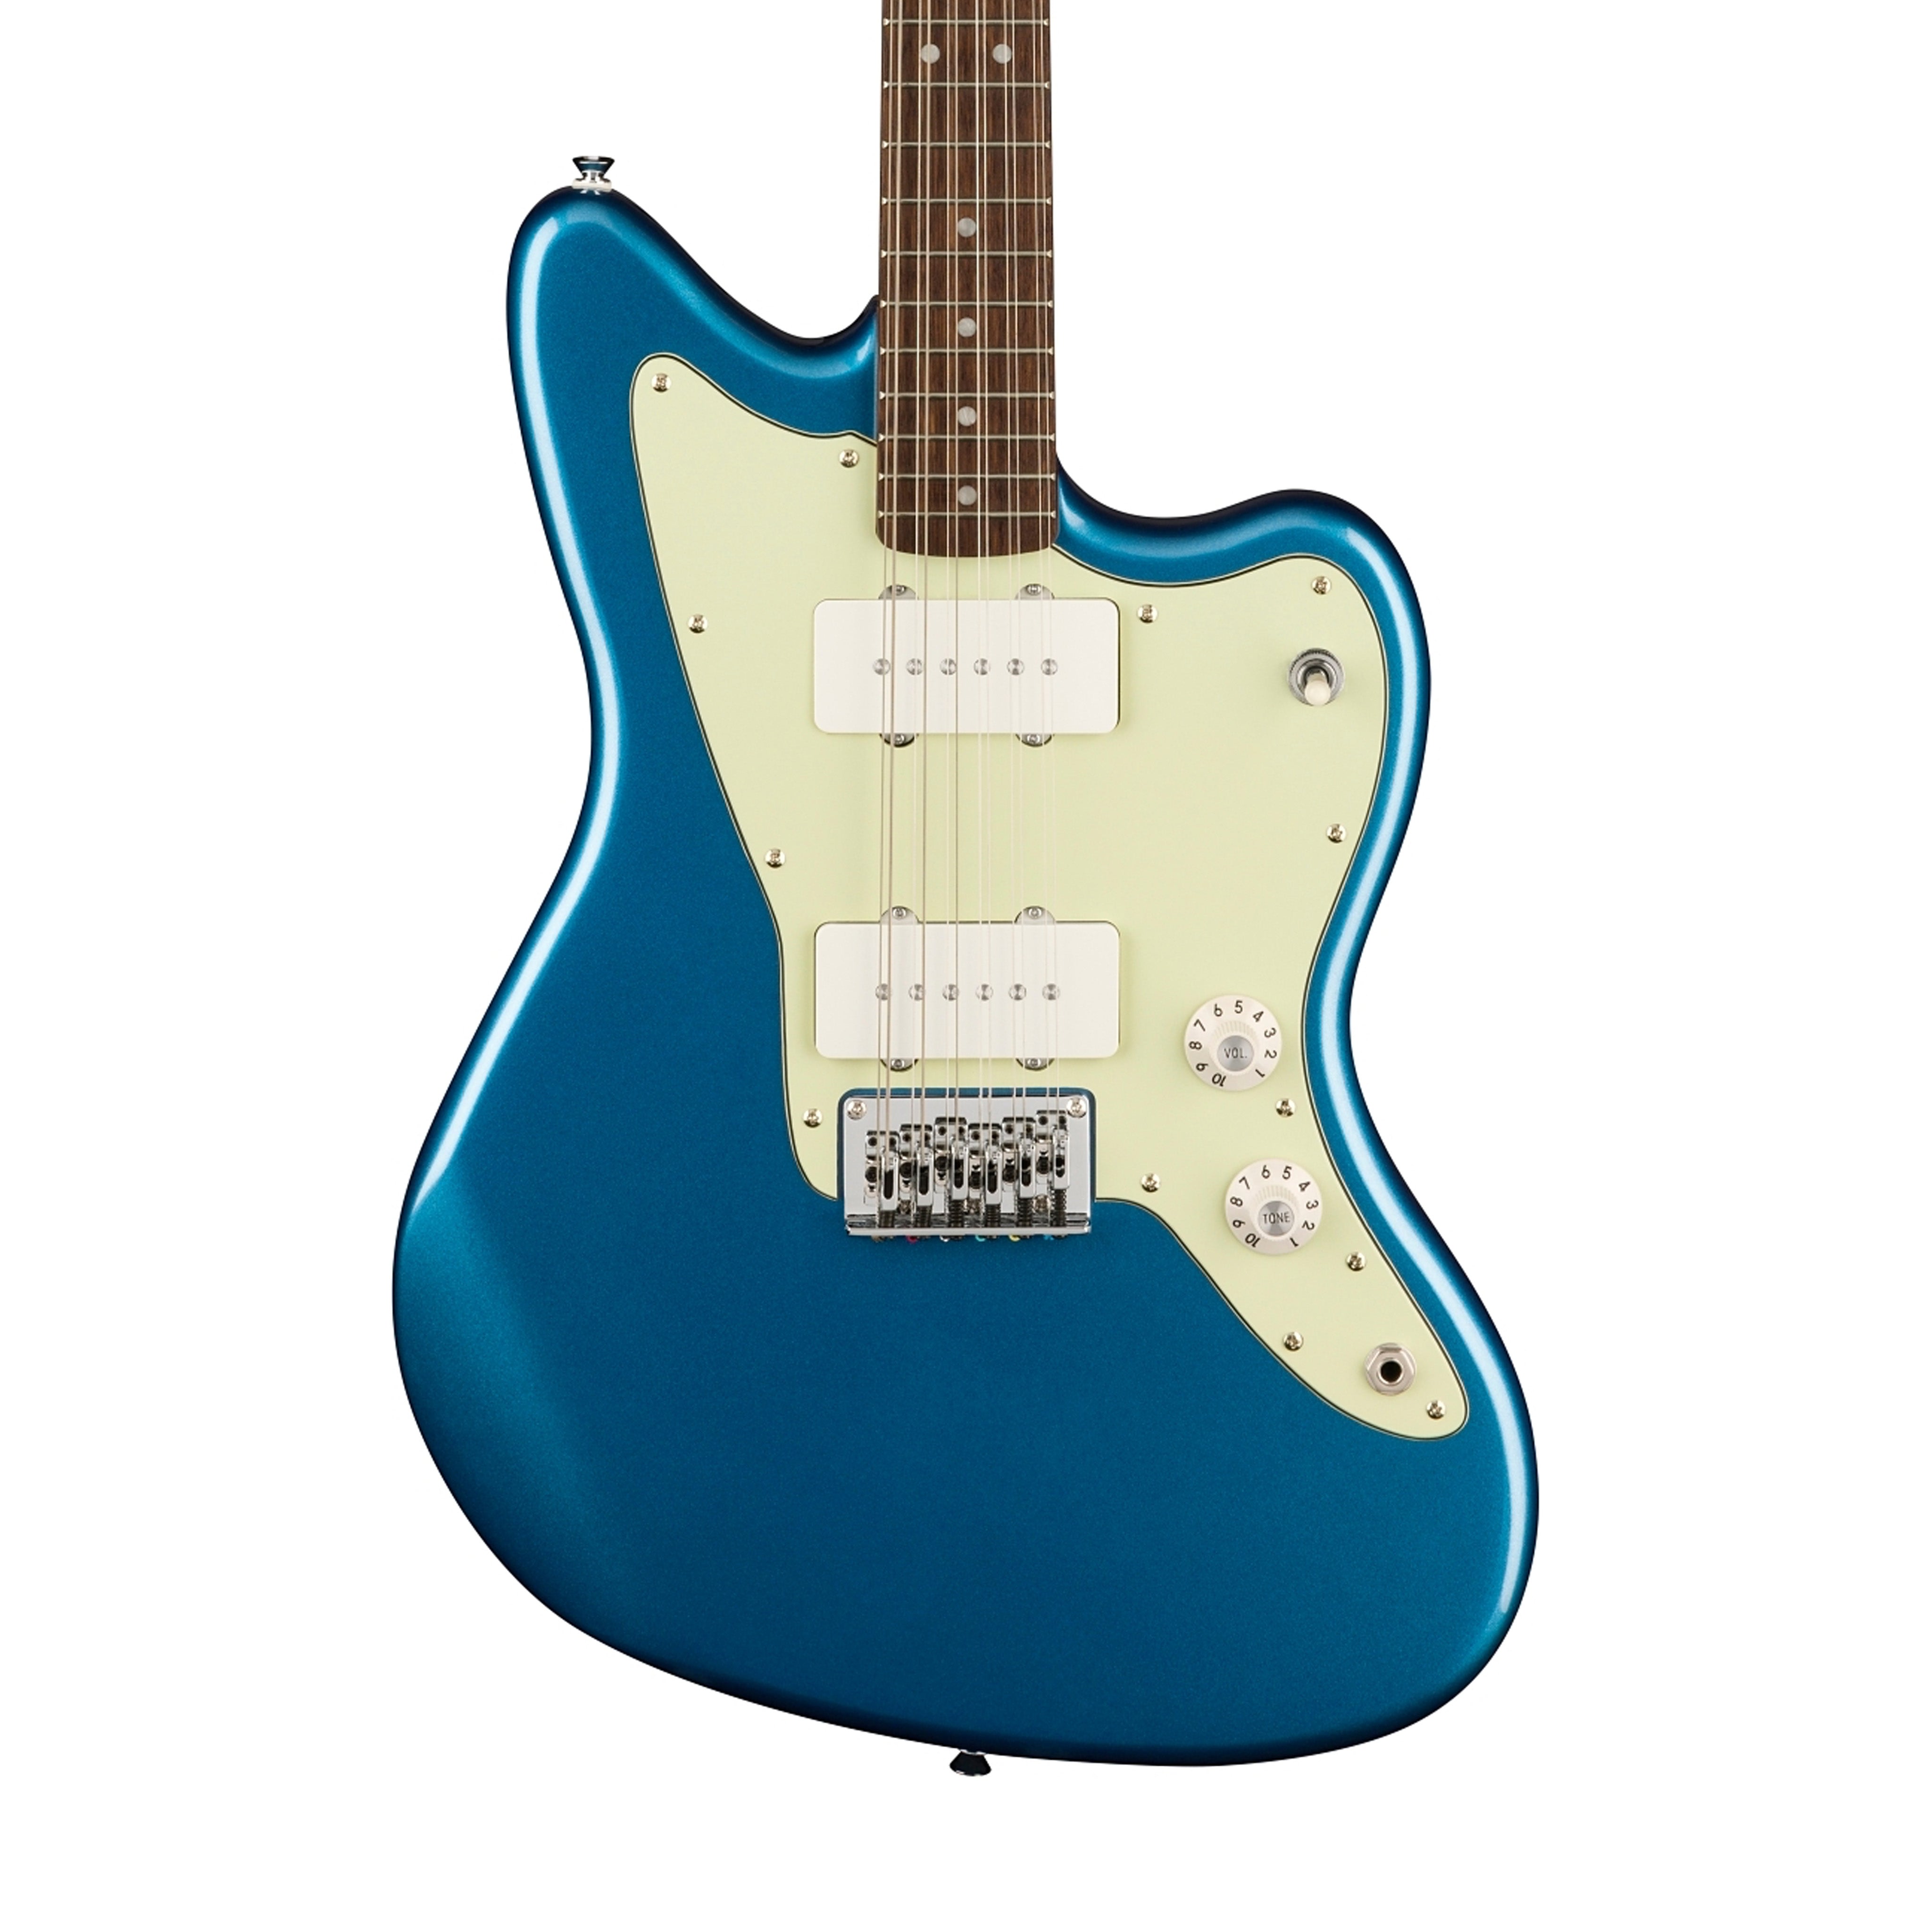 Squier Paranormal Jazzmaster XII 12-String Electric Guitar, Lake Placid Blue | Zoso Music Sdn Bhd